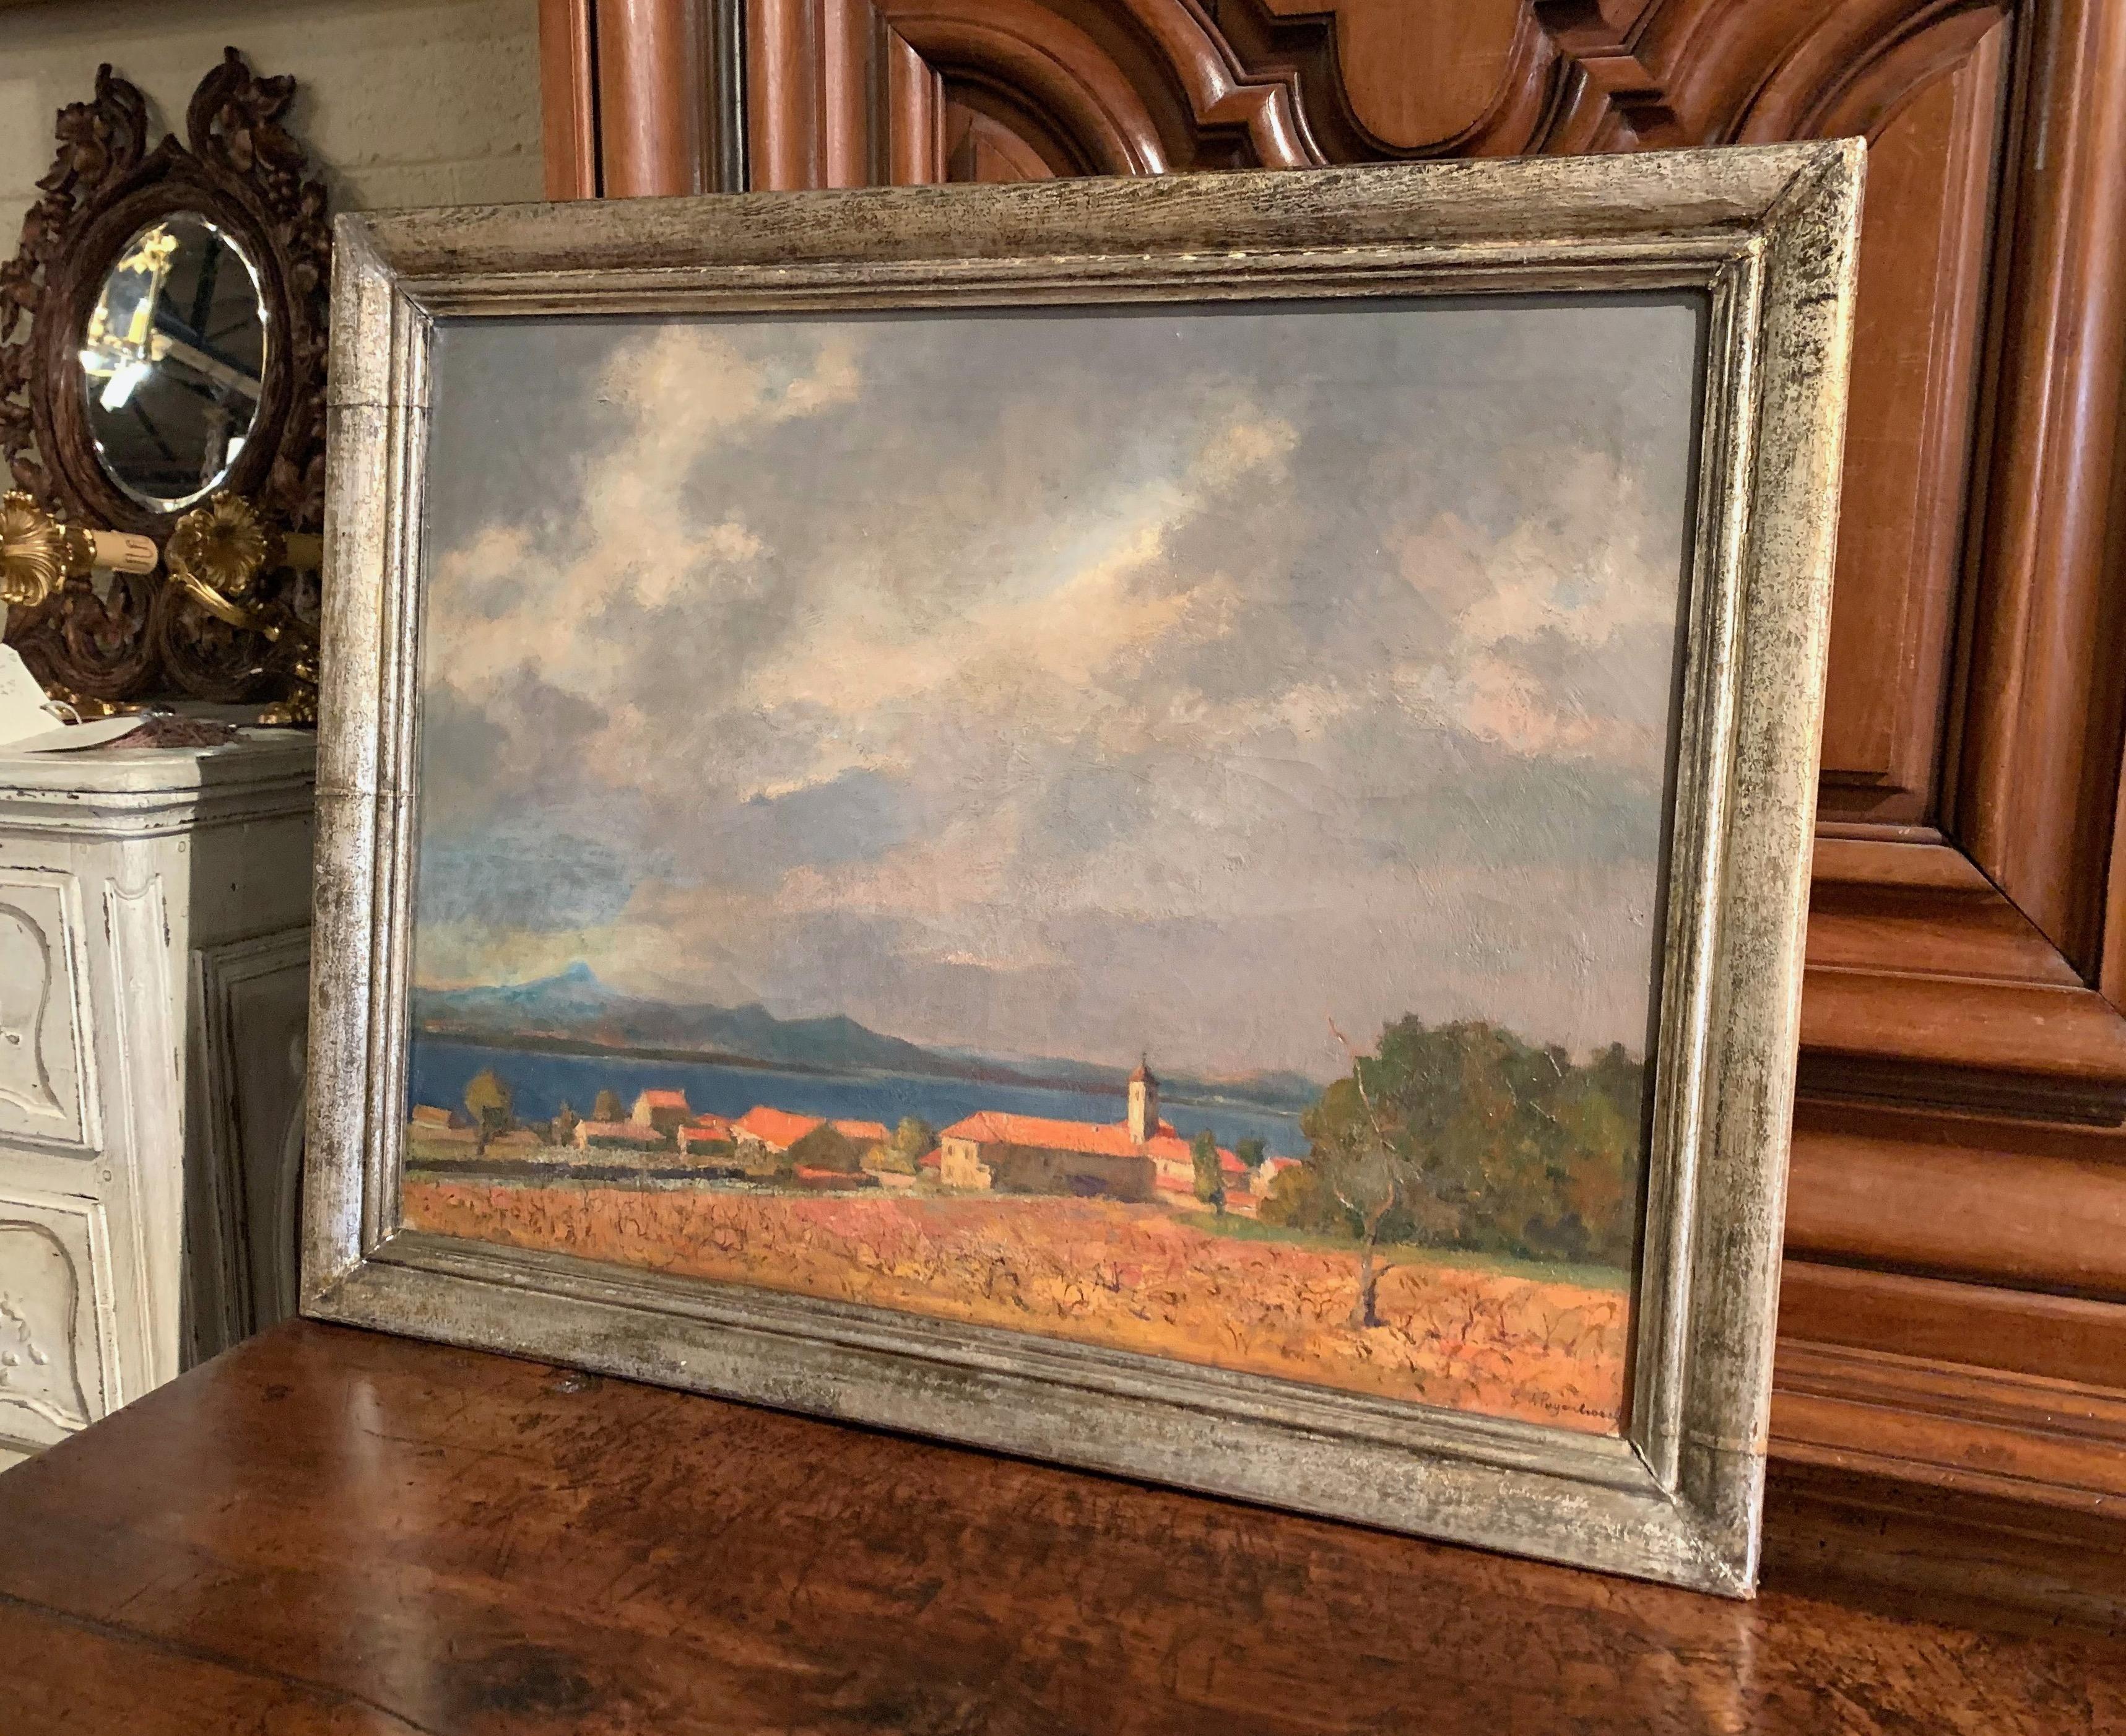 French Riviera Oil on Canvas Painting Signed G. Van Puyenbroeck, Dated 1932 For Sale 2